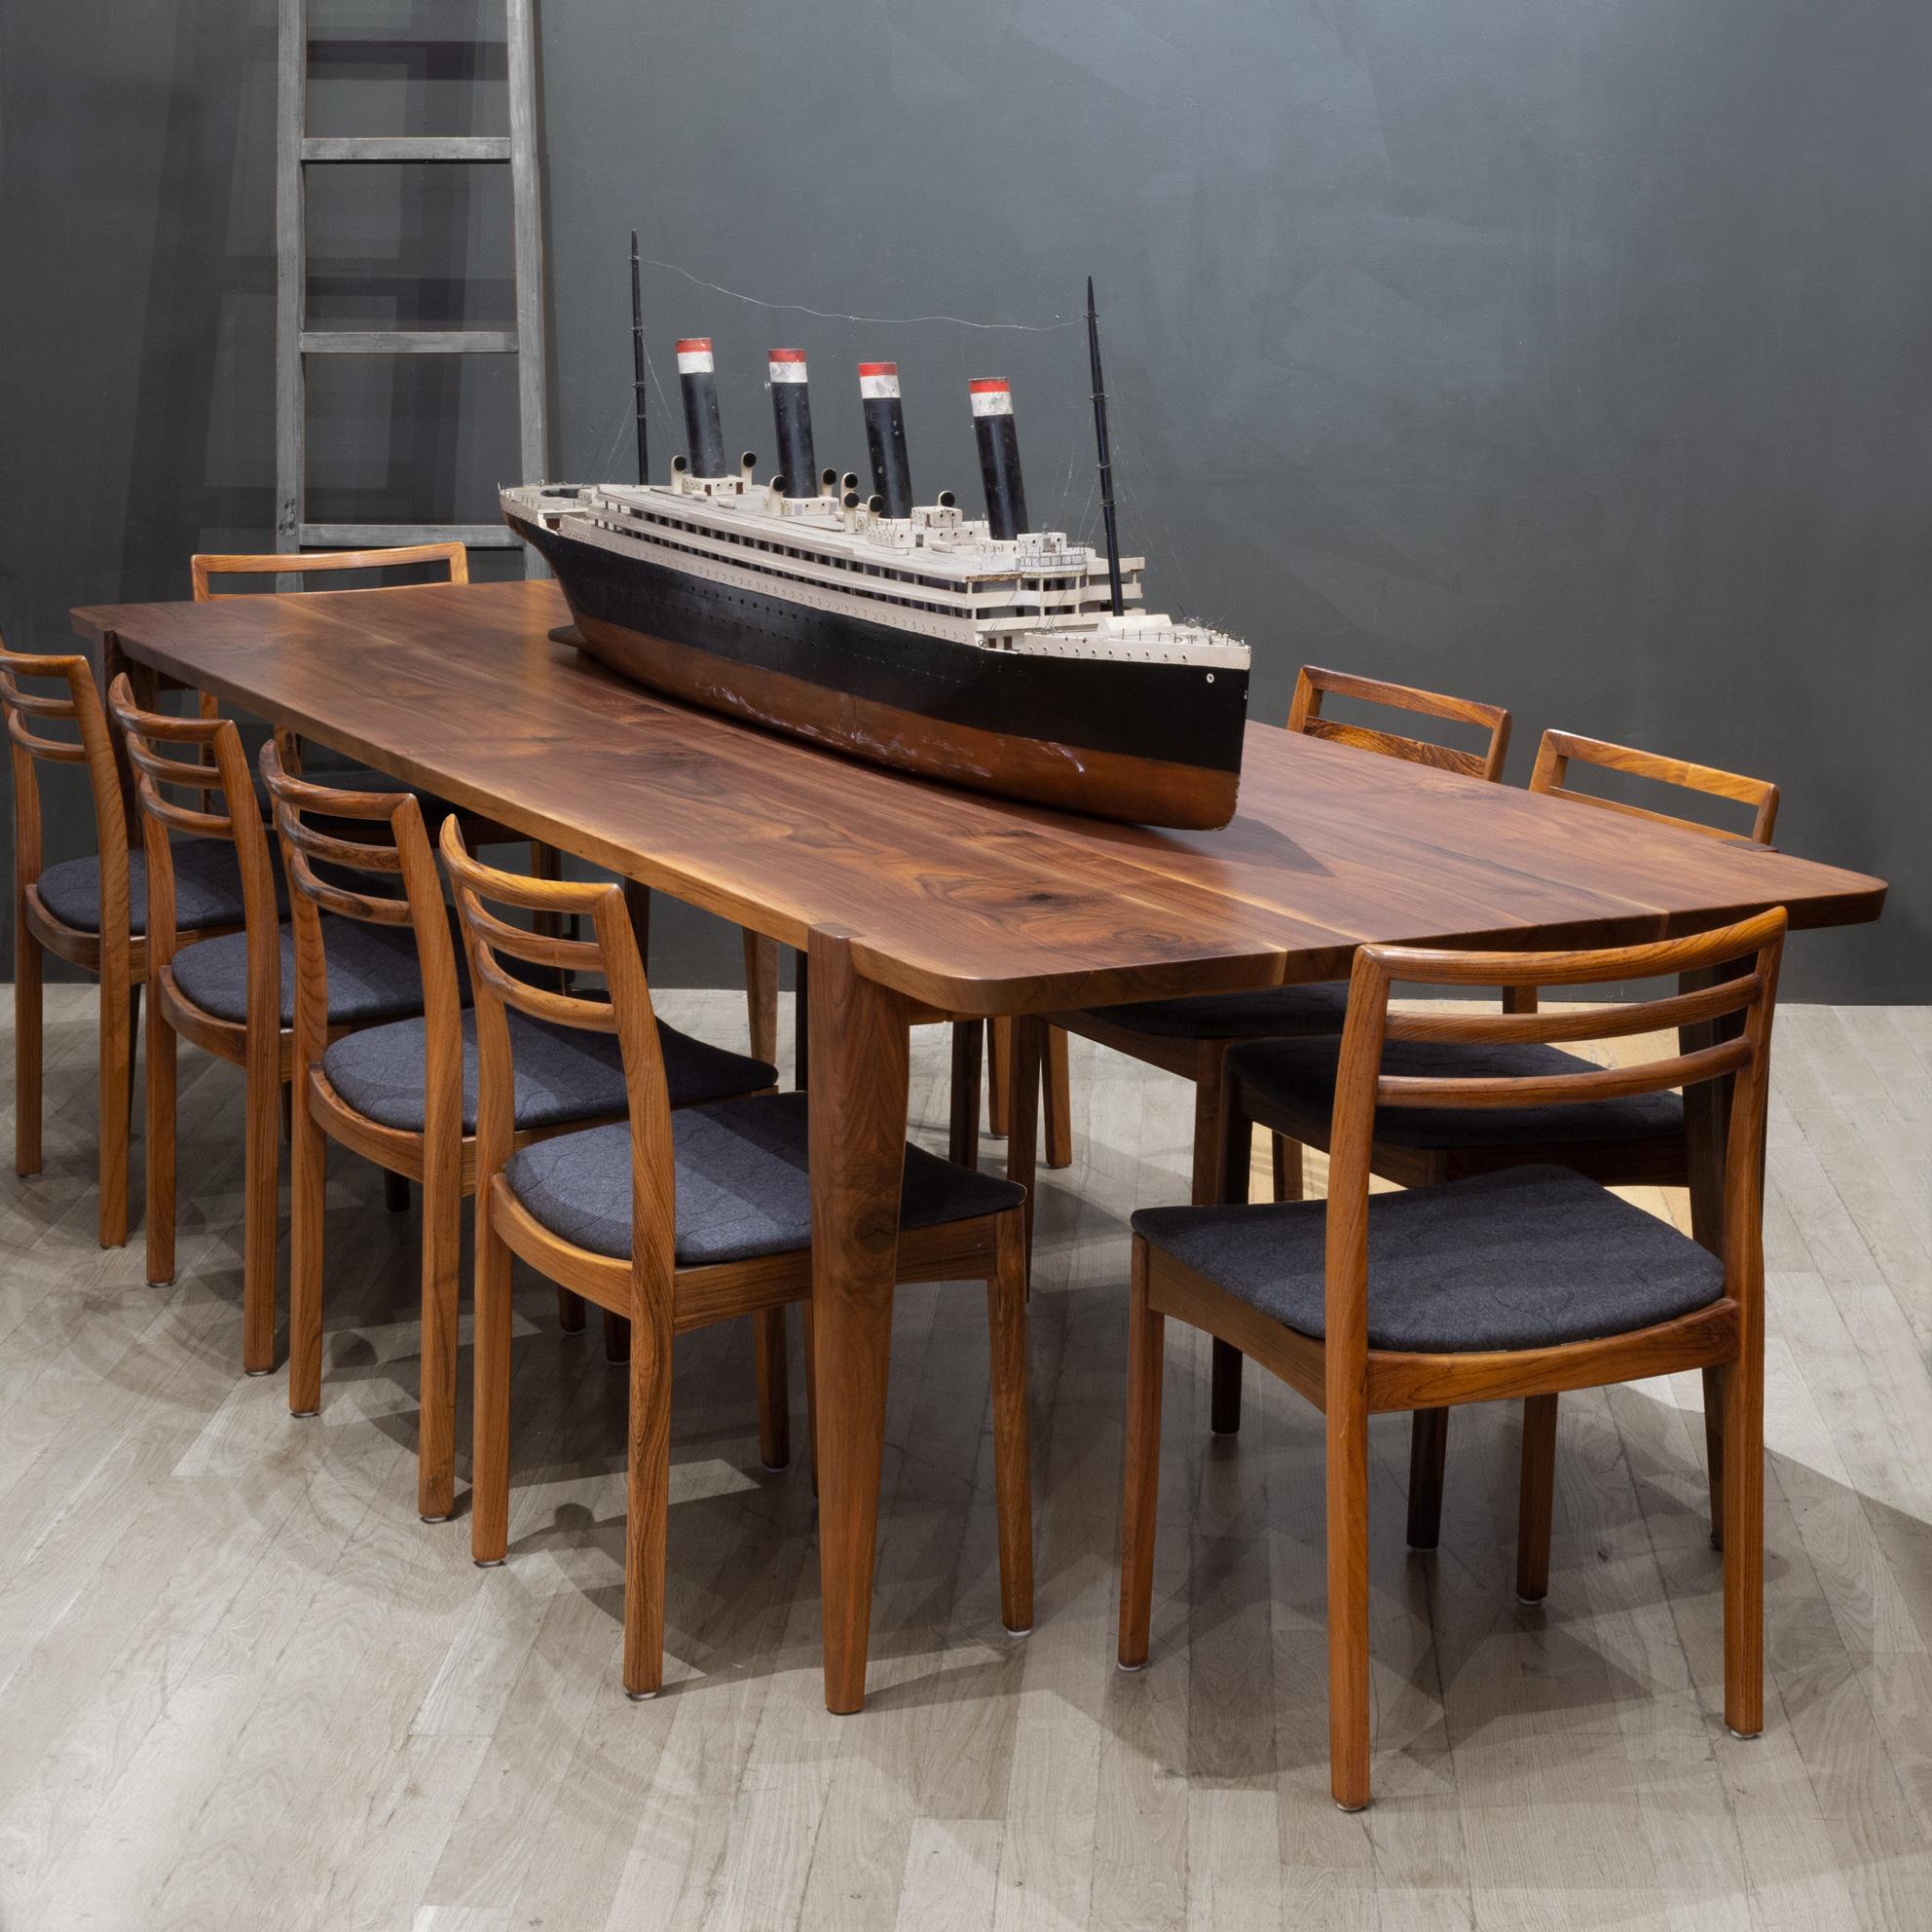 ABOUT

The clean natural lines of the Oslo Dining table are a perfect fit for any style dining room. Featuring Studio Moe's signature beveled edges, tapered legs, and notched joinery, this sophisticated yet family-friendly dining table is built